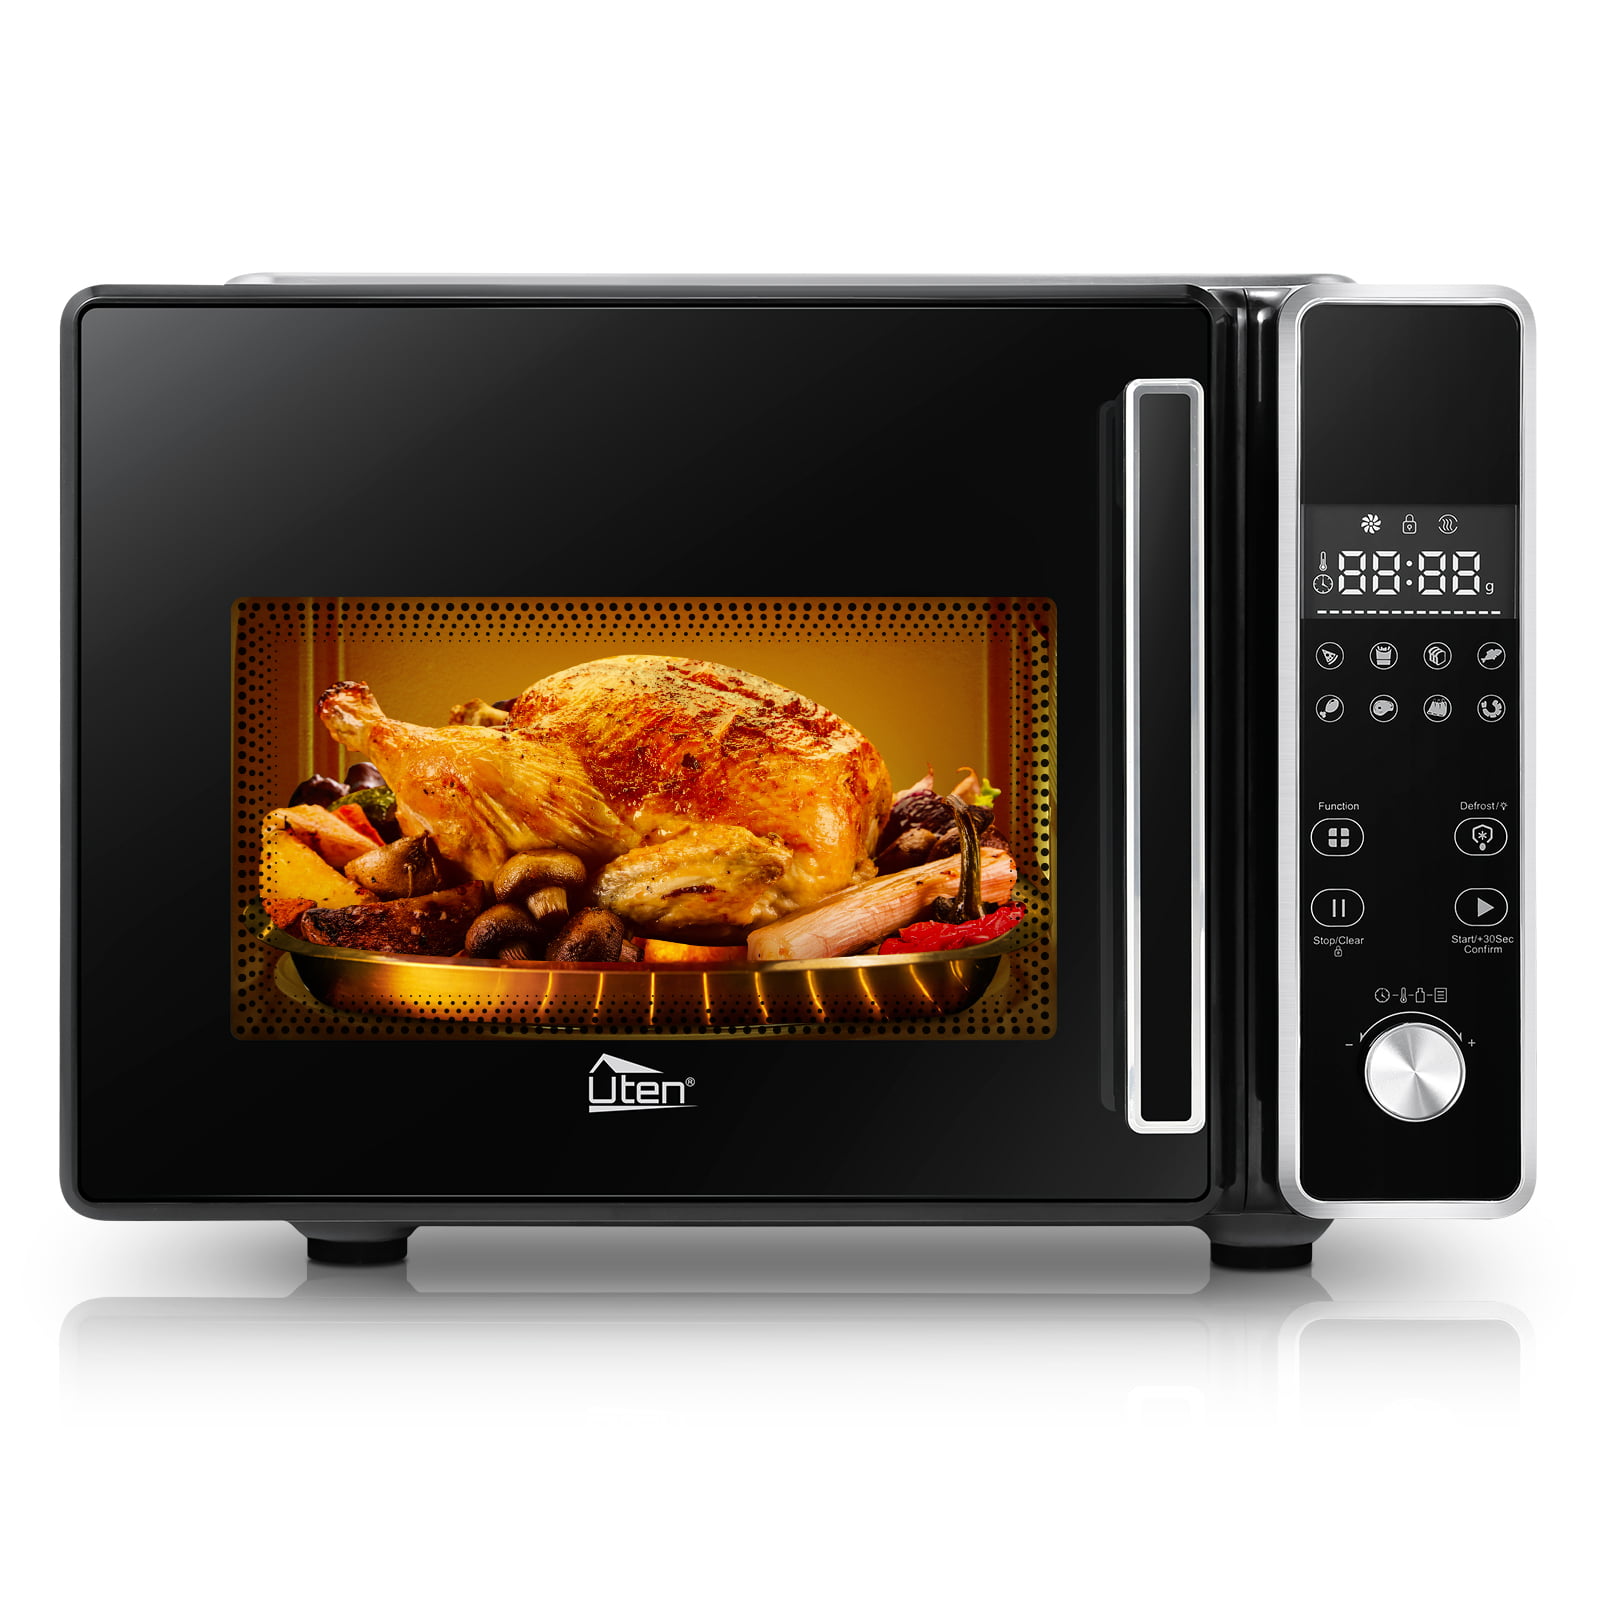 Drivemate 24 volt microwave ovens and Power supply for trucks and HGVs now  launched.